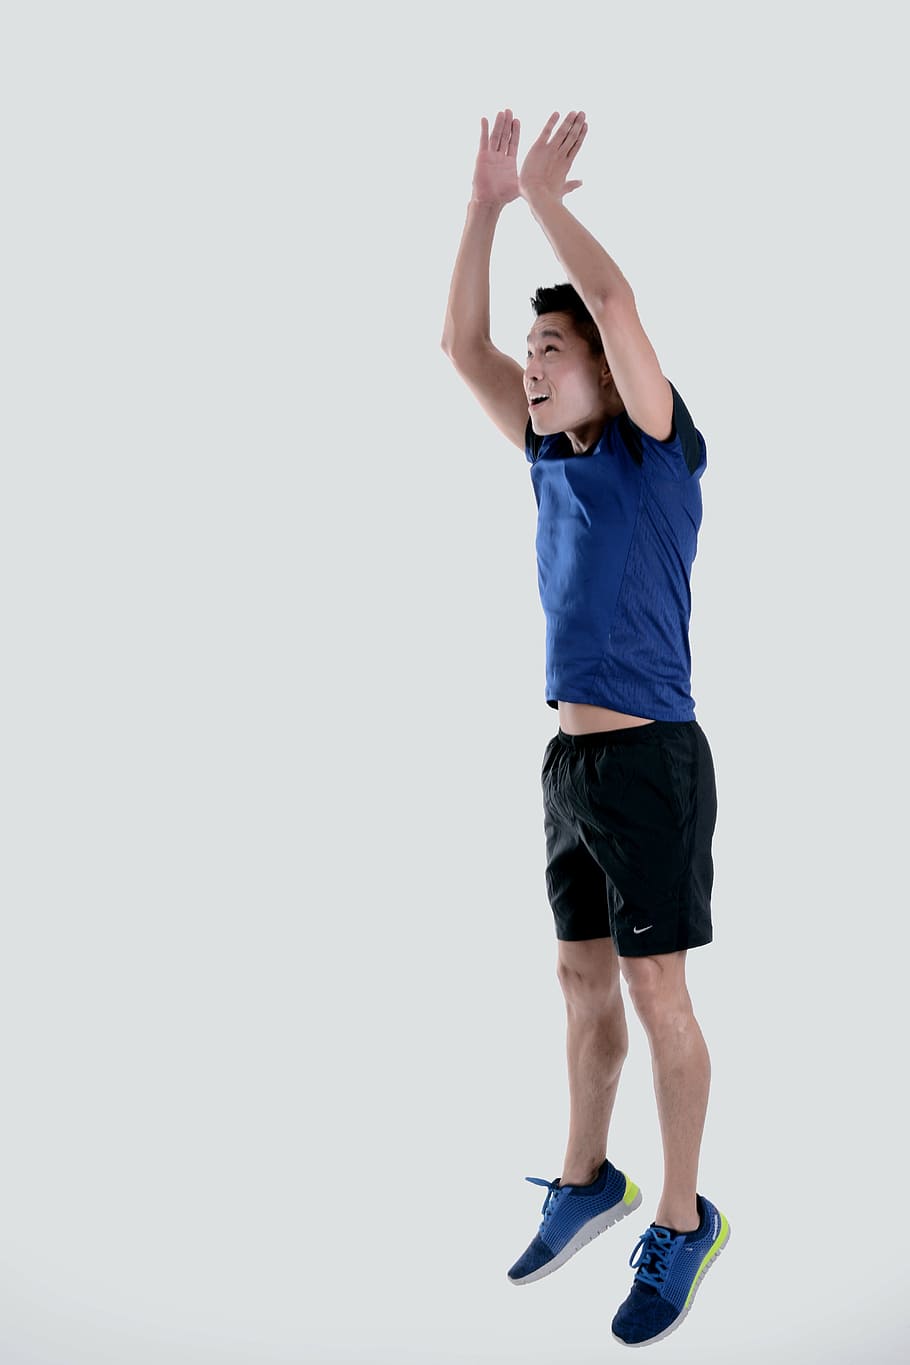 boy, jumping, clapping, sport, fitness, exercise, pilates, face man, body man, body